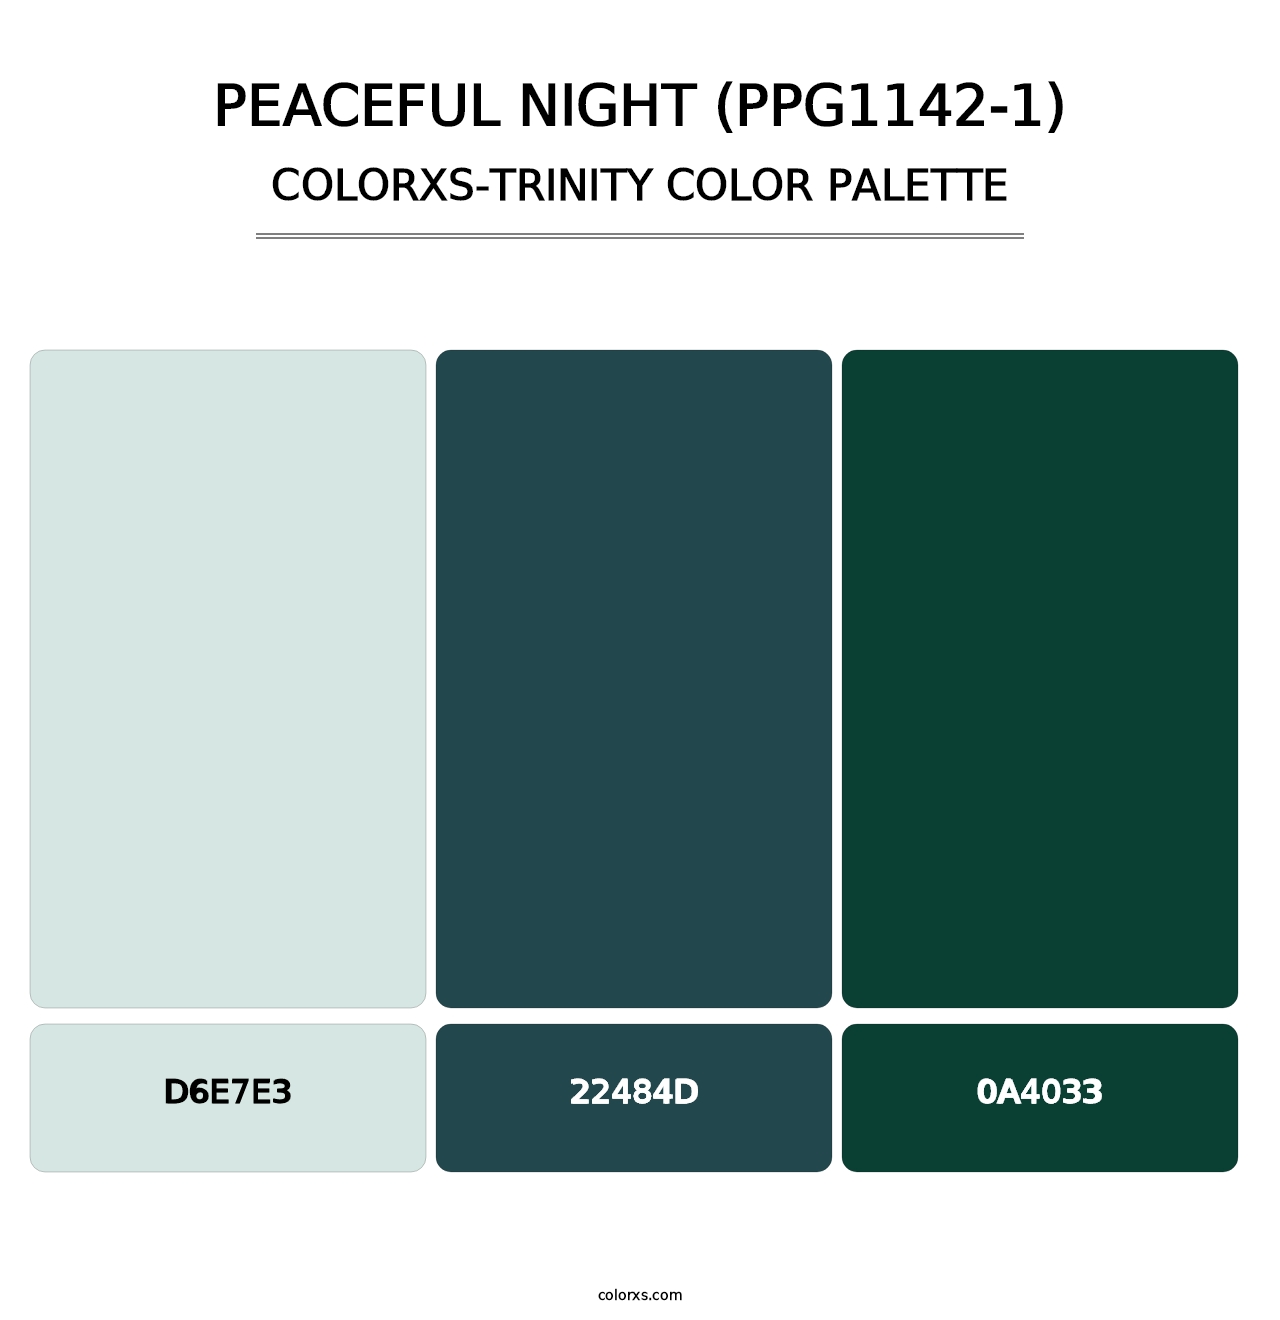 Peaceful Night (PPG1142-1) - Colorxs Trinity Palette